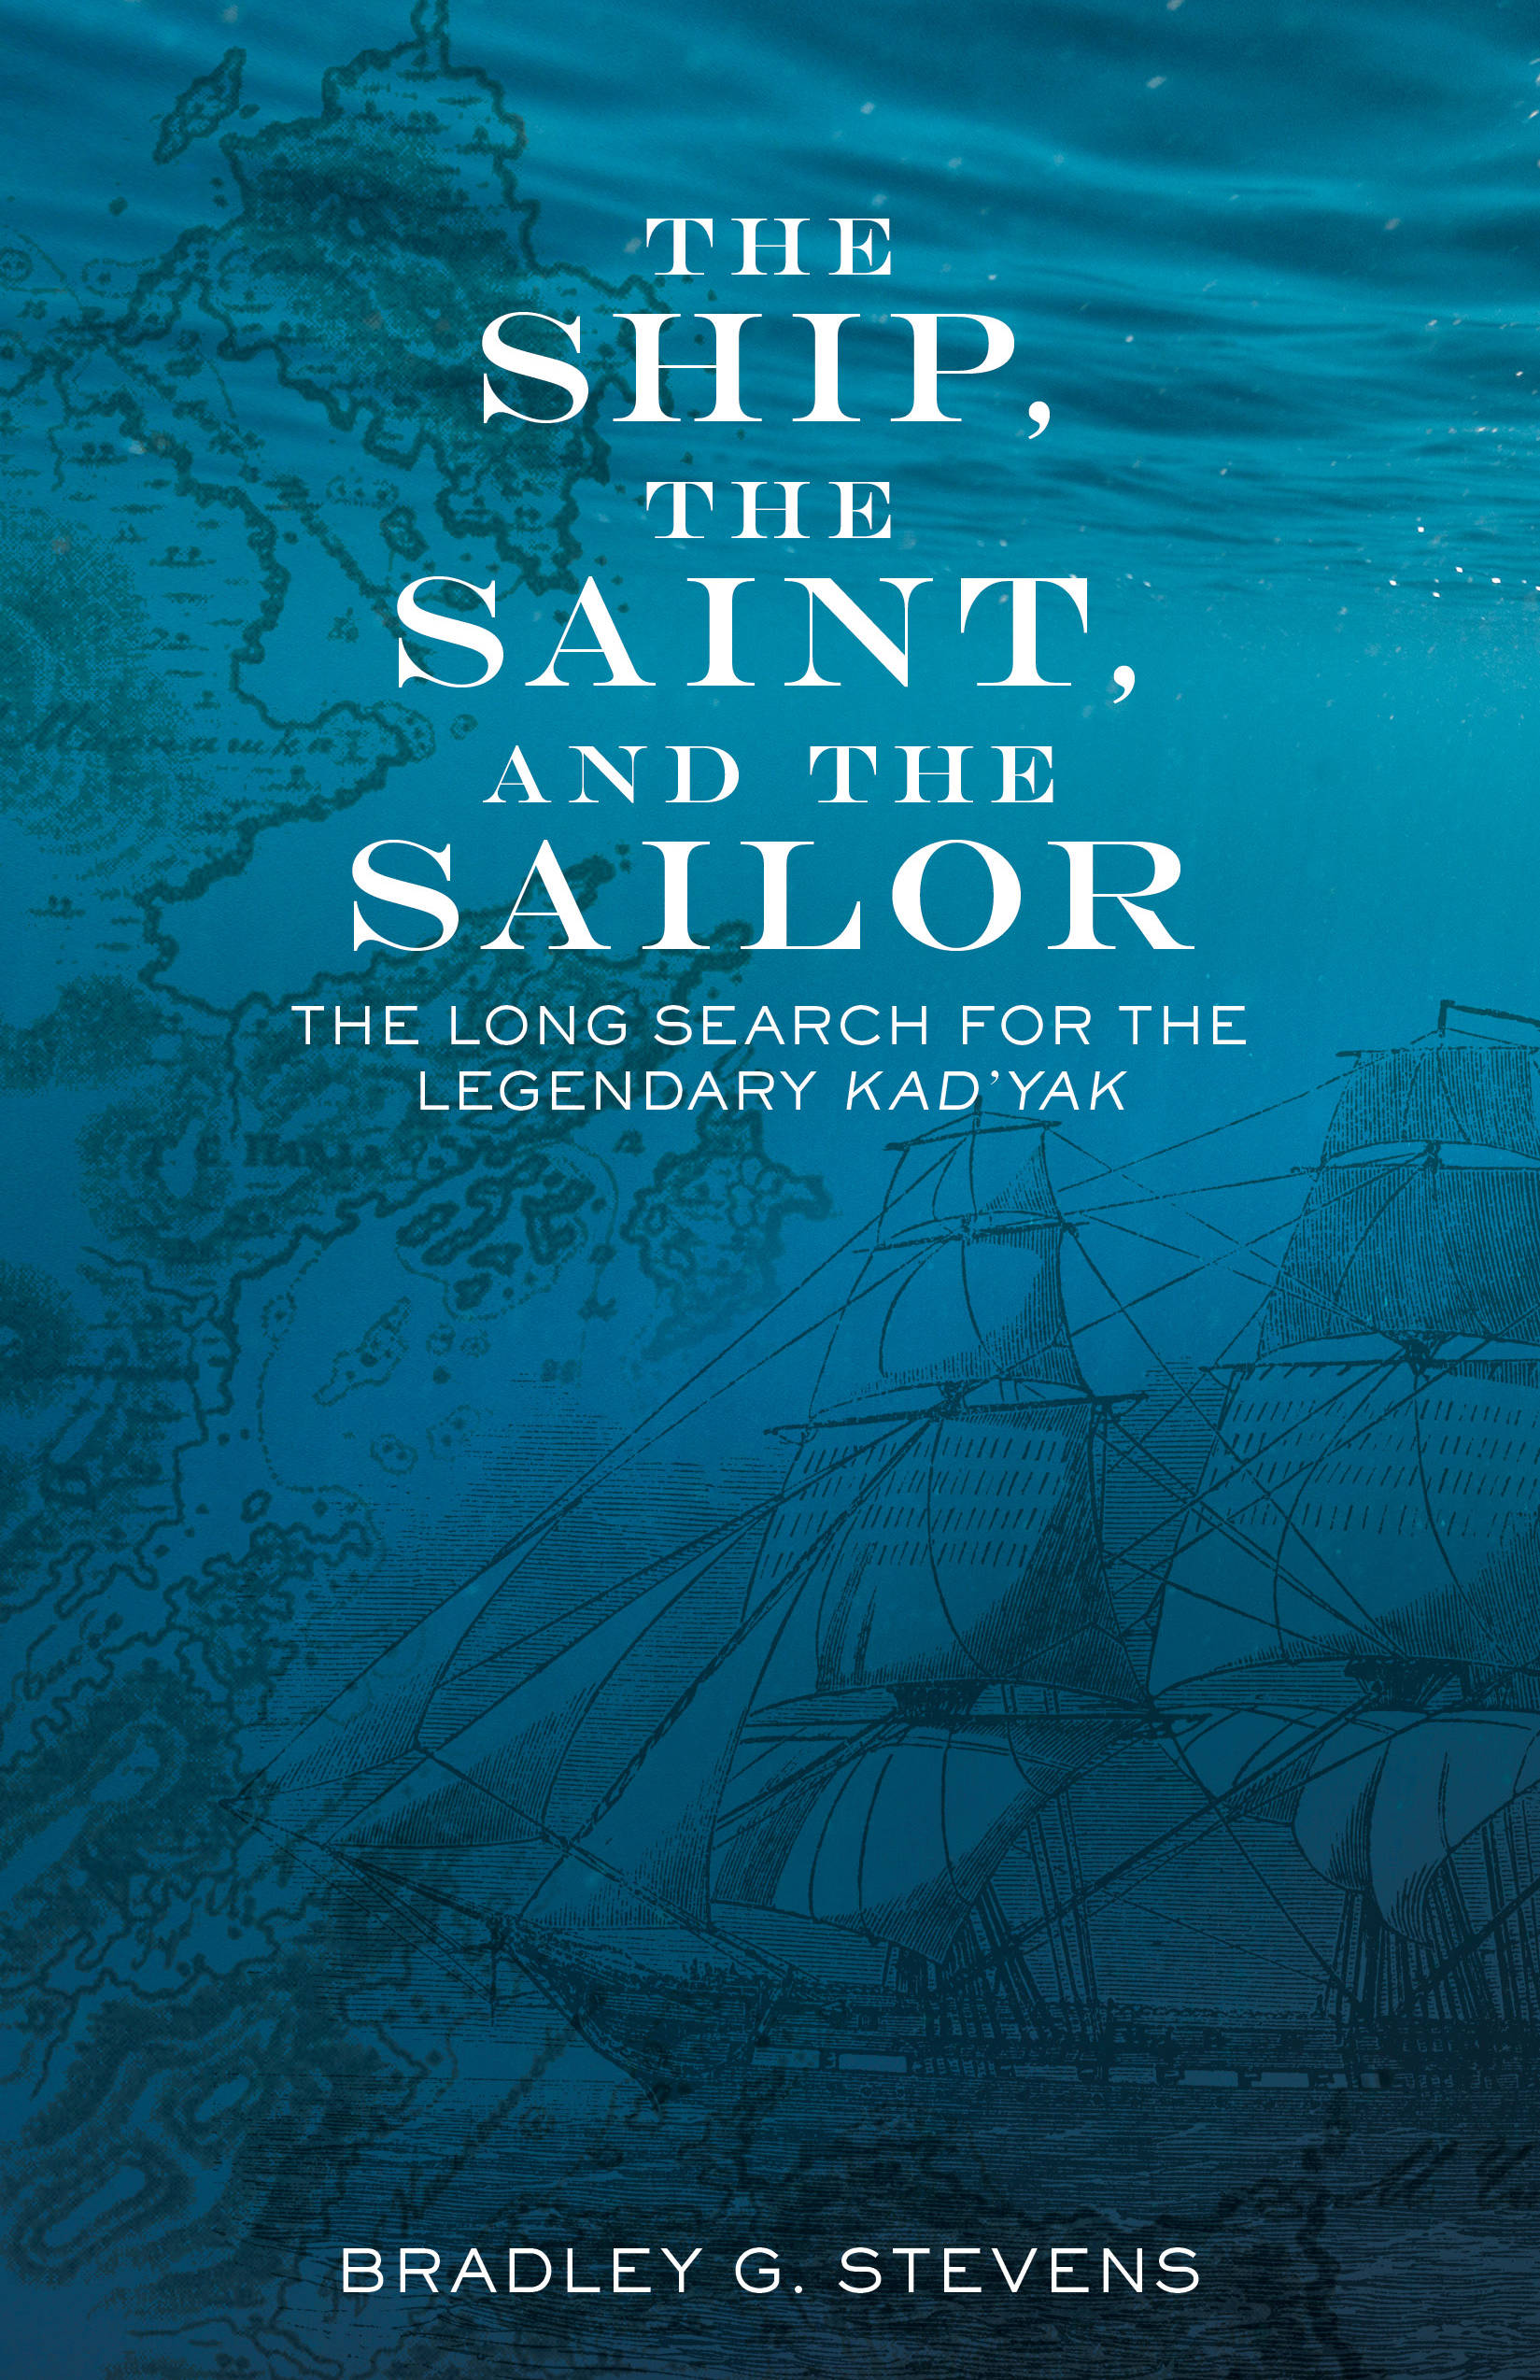 “The Ship, The Saint, and the Sailor: The Long Search for the Legendary Kad’yak” is a book by Brad Stevens, who helped discover the wreck of a ship that had been unrecovered for more than 140 years. (Courtesy Photo | Brad Stevens)